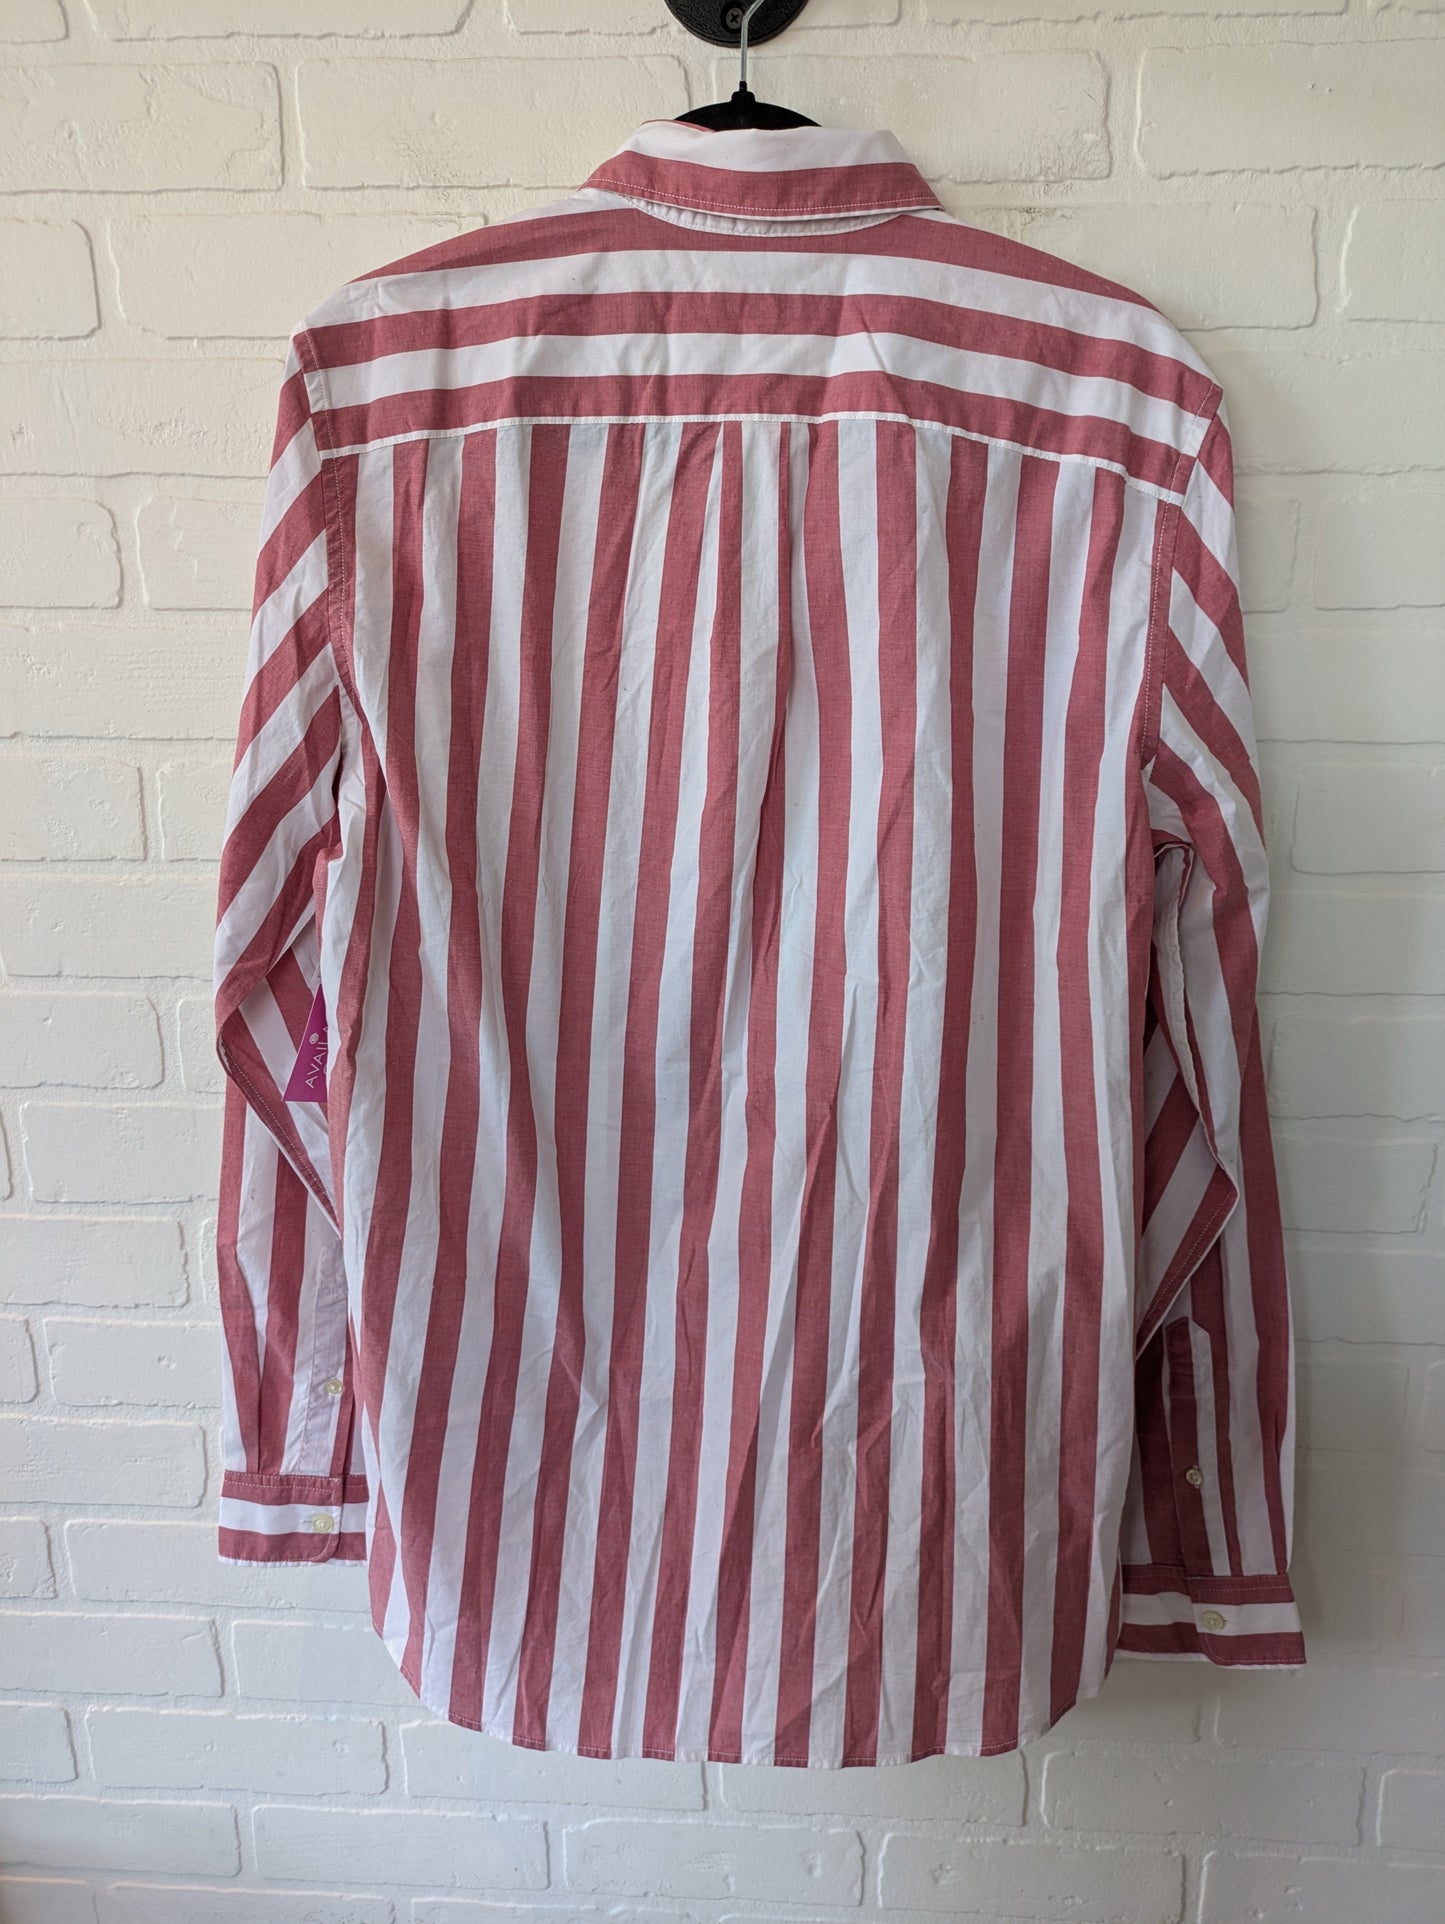 Red & White Top Long Sleeve Gap, Size M